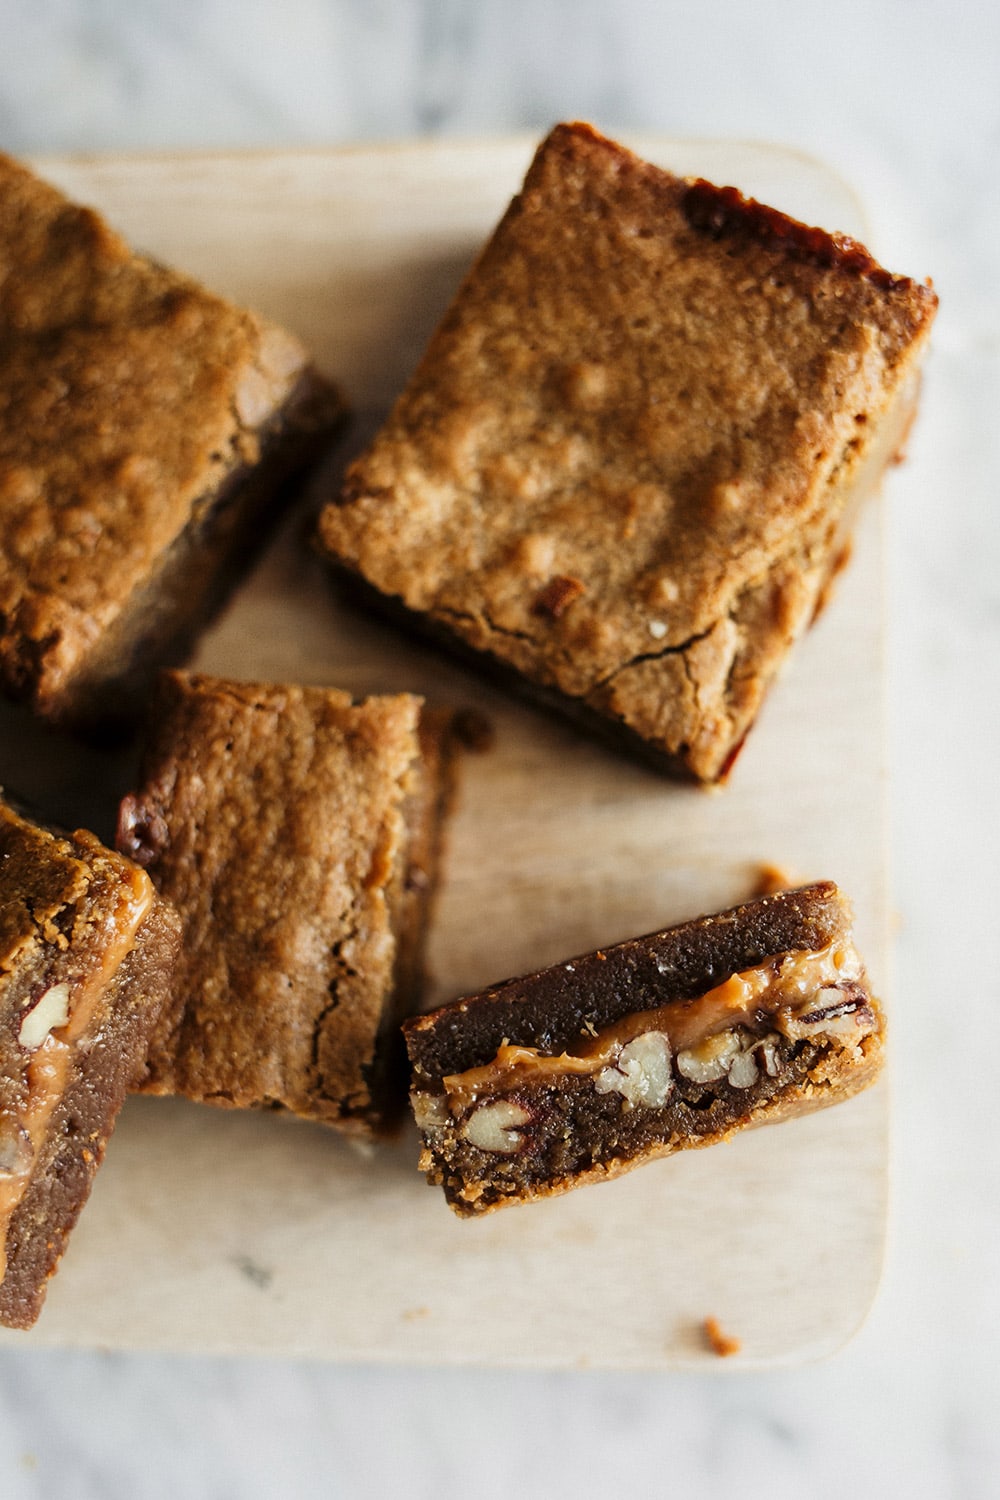 Caramel Pecan Blondies feature an ultra chewy brown sugar blondie with a hidden layer of rich, gooey, and crunchy caramel pecan filling. Out of this world!